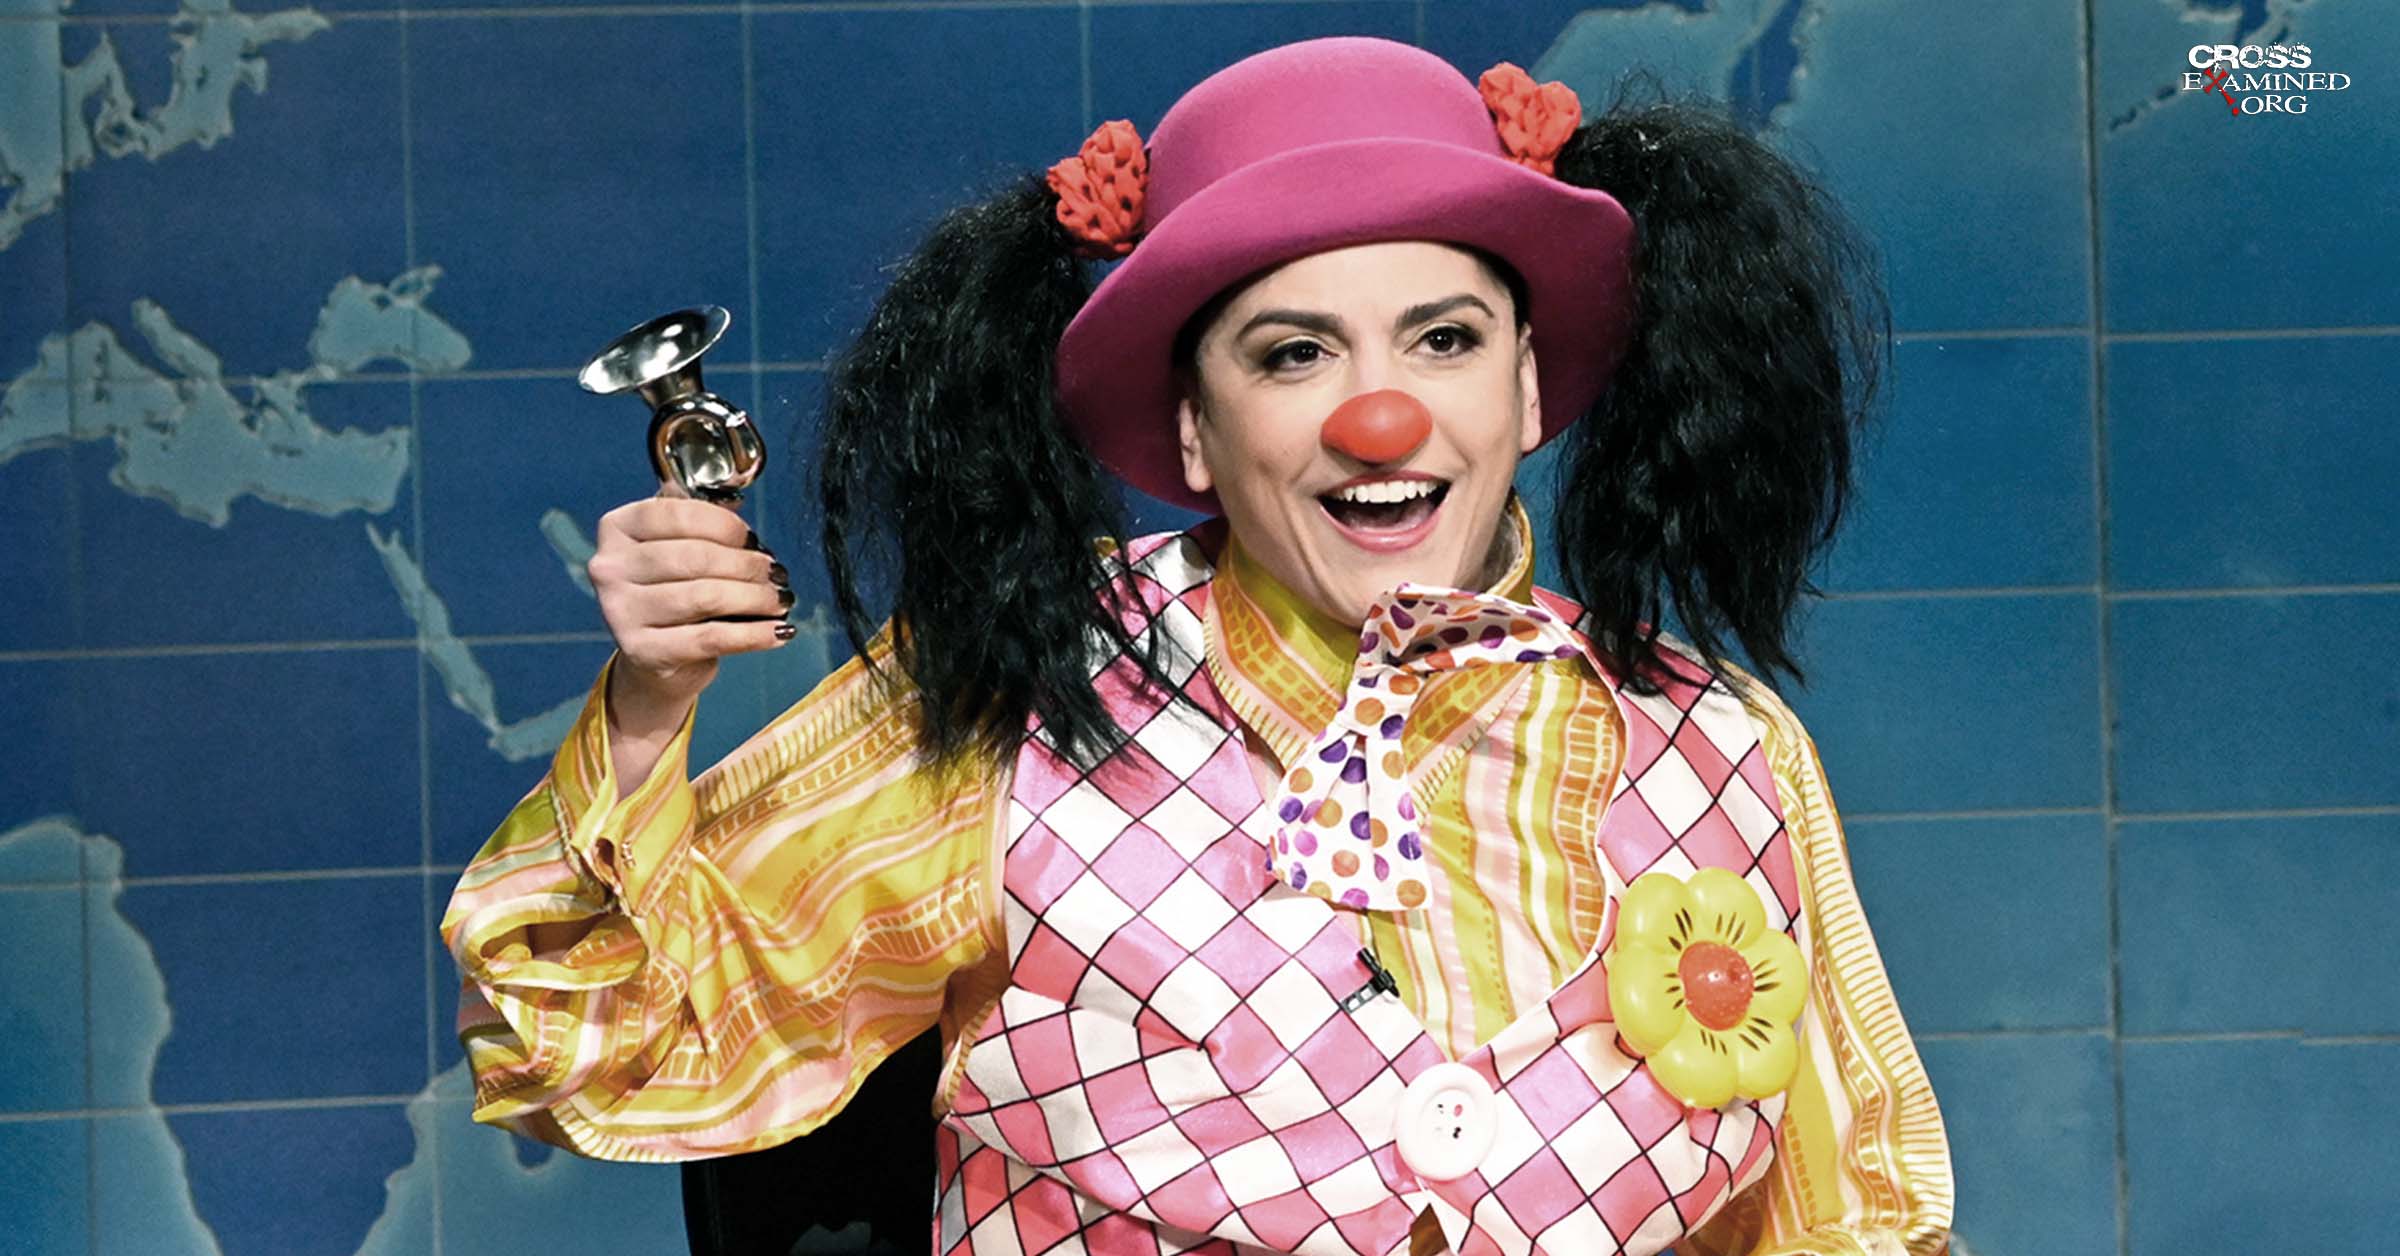 How Culture Got to the Point Where Saturday Night Live is Promoting Abortion in a Clown Outfit